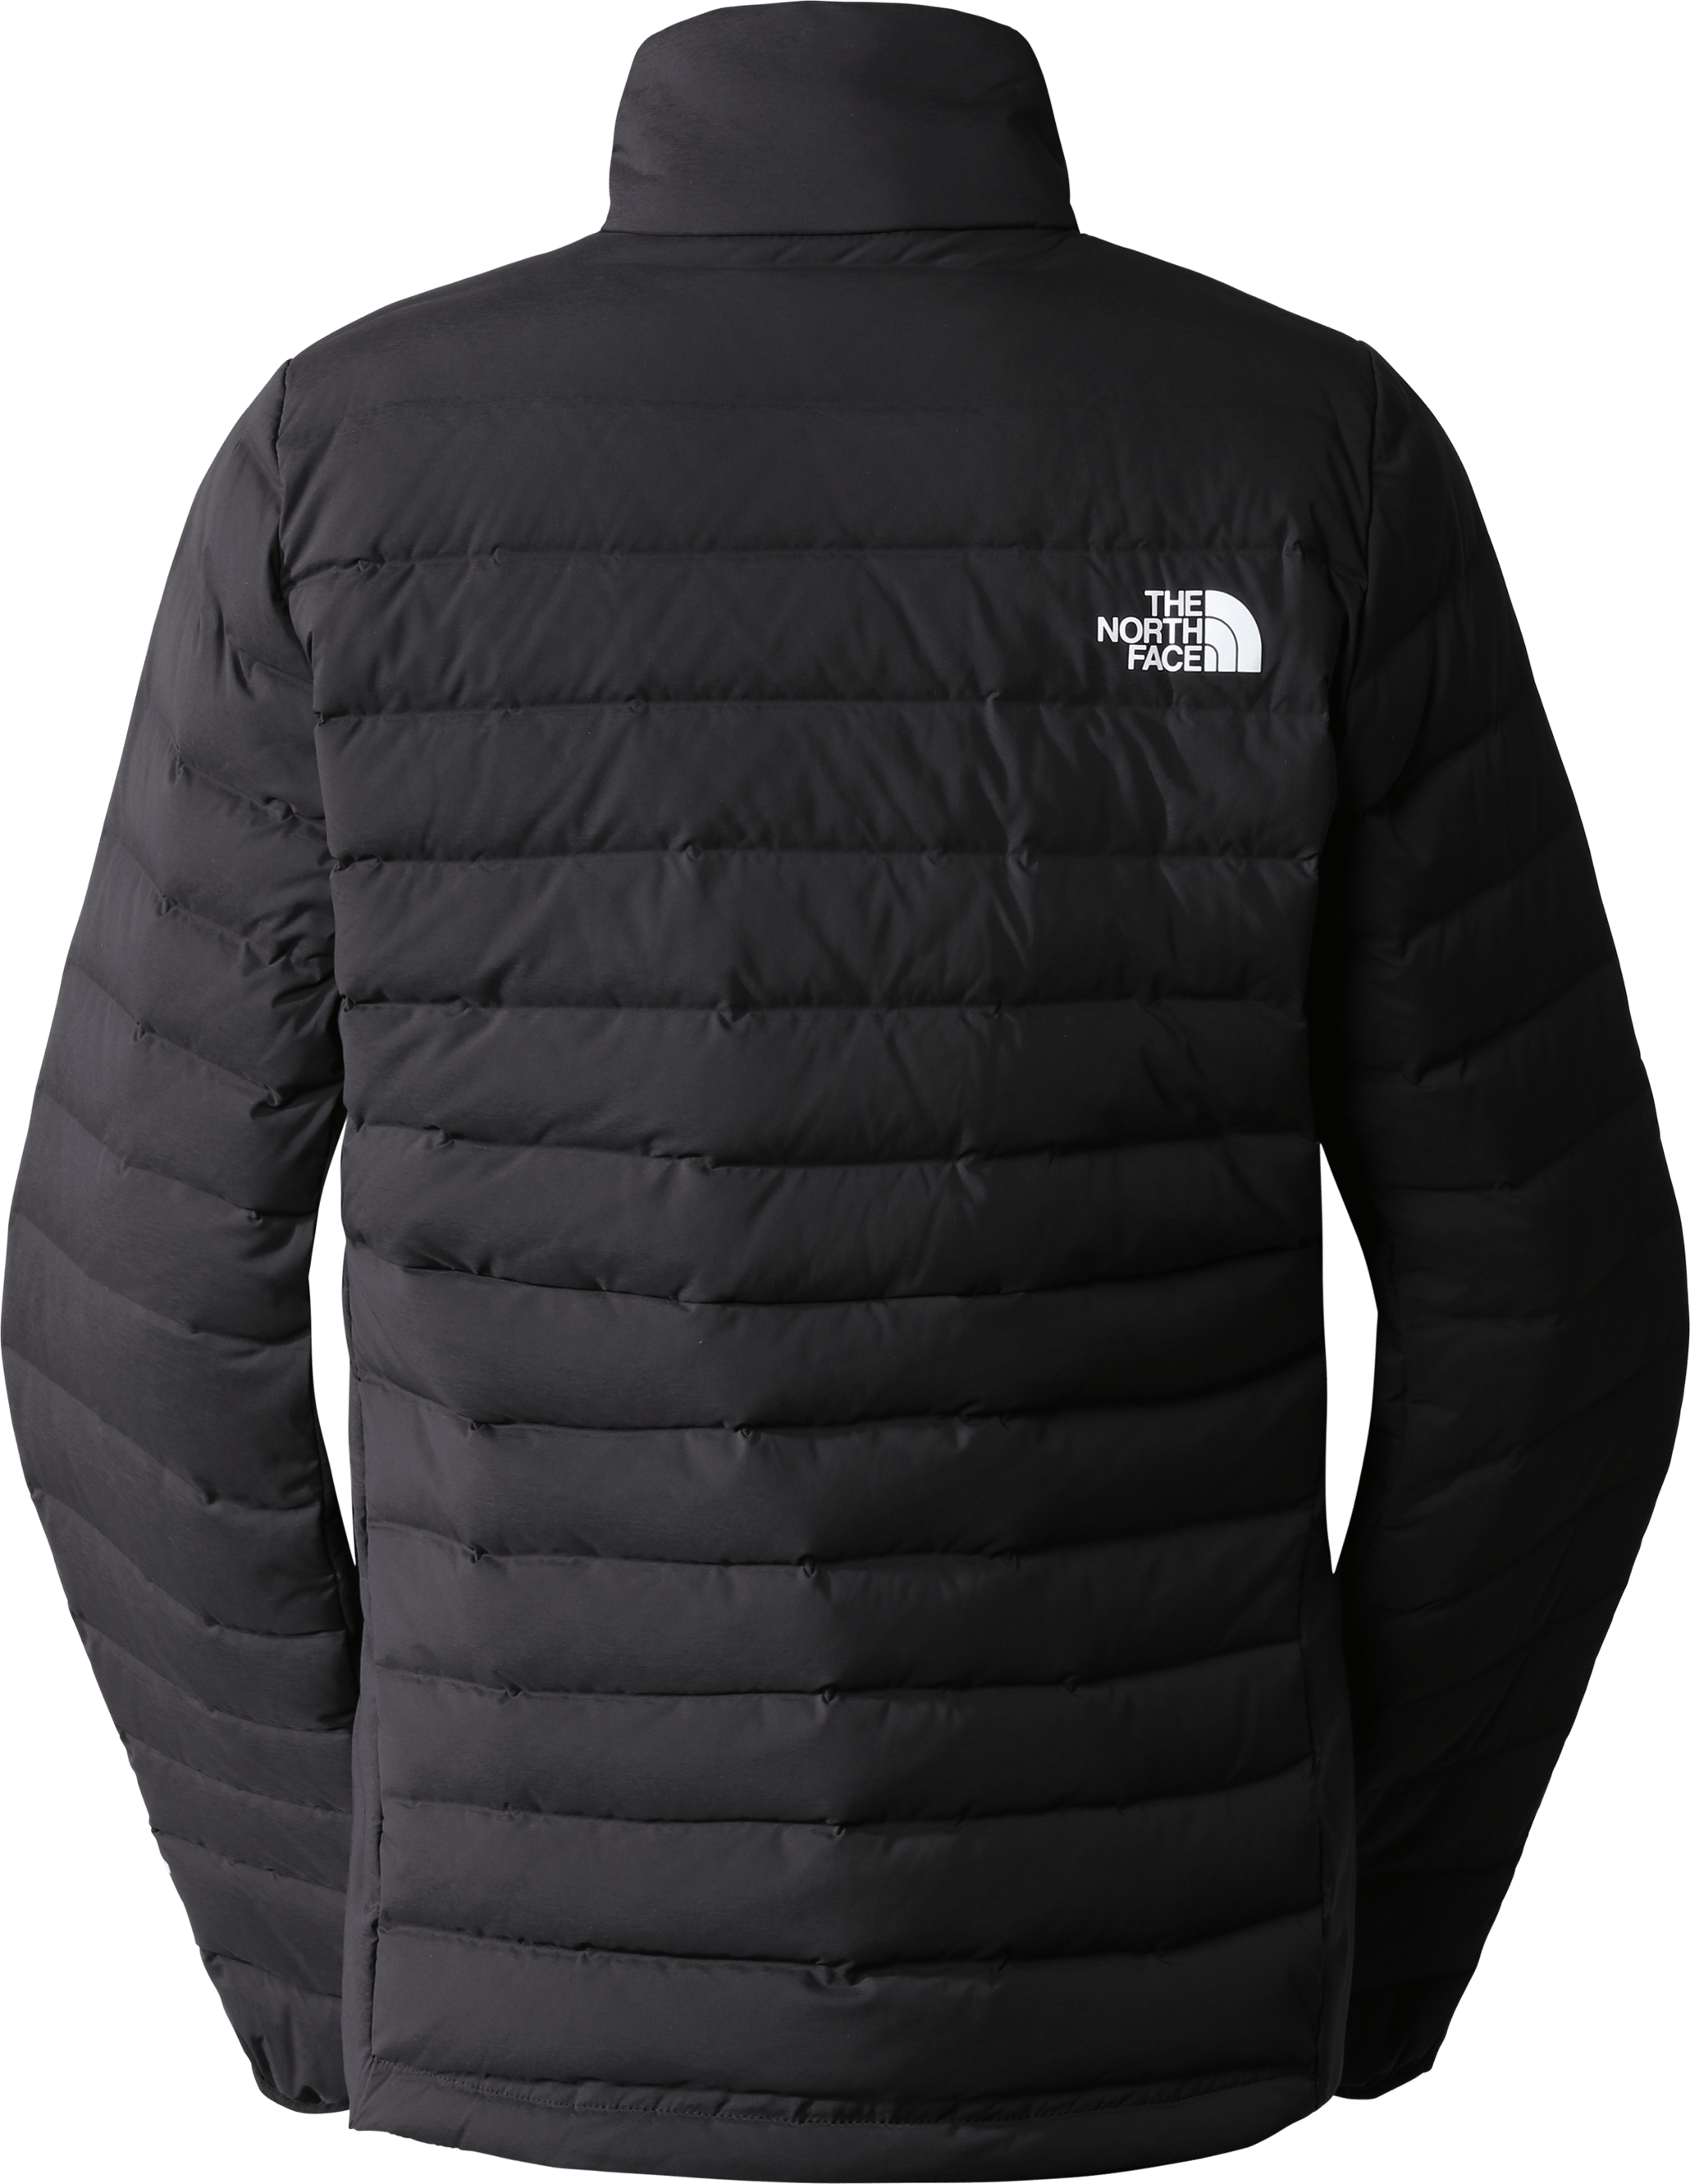 Jacket TNF Belleview Black Outnorth Down | Black Belleview Down | Stretch here Buy Women\'s Women\'s Jacket TNF Stretch